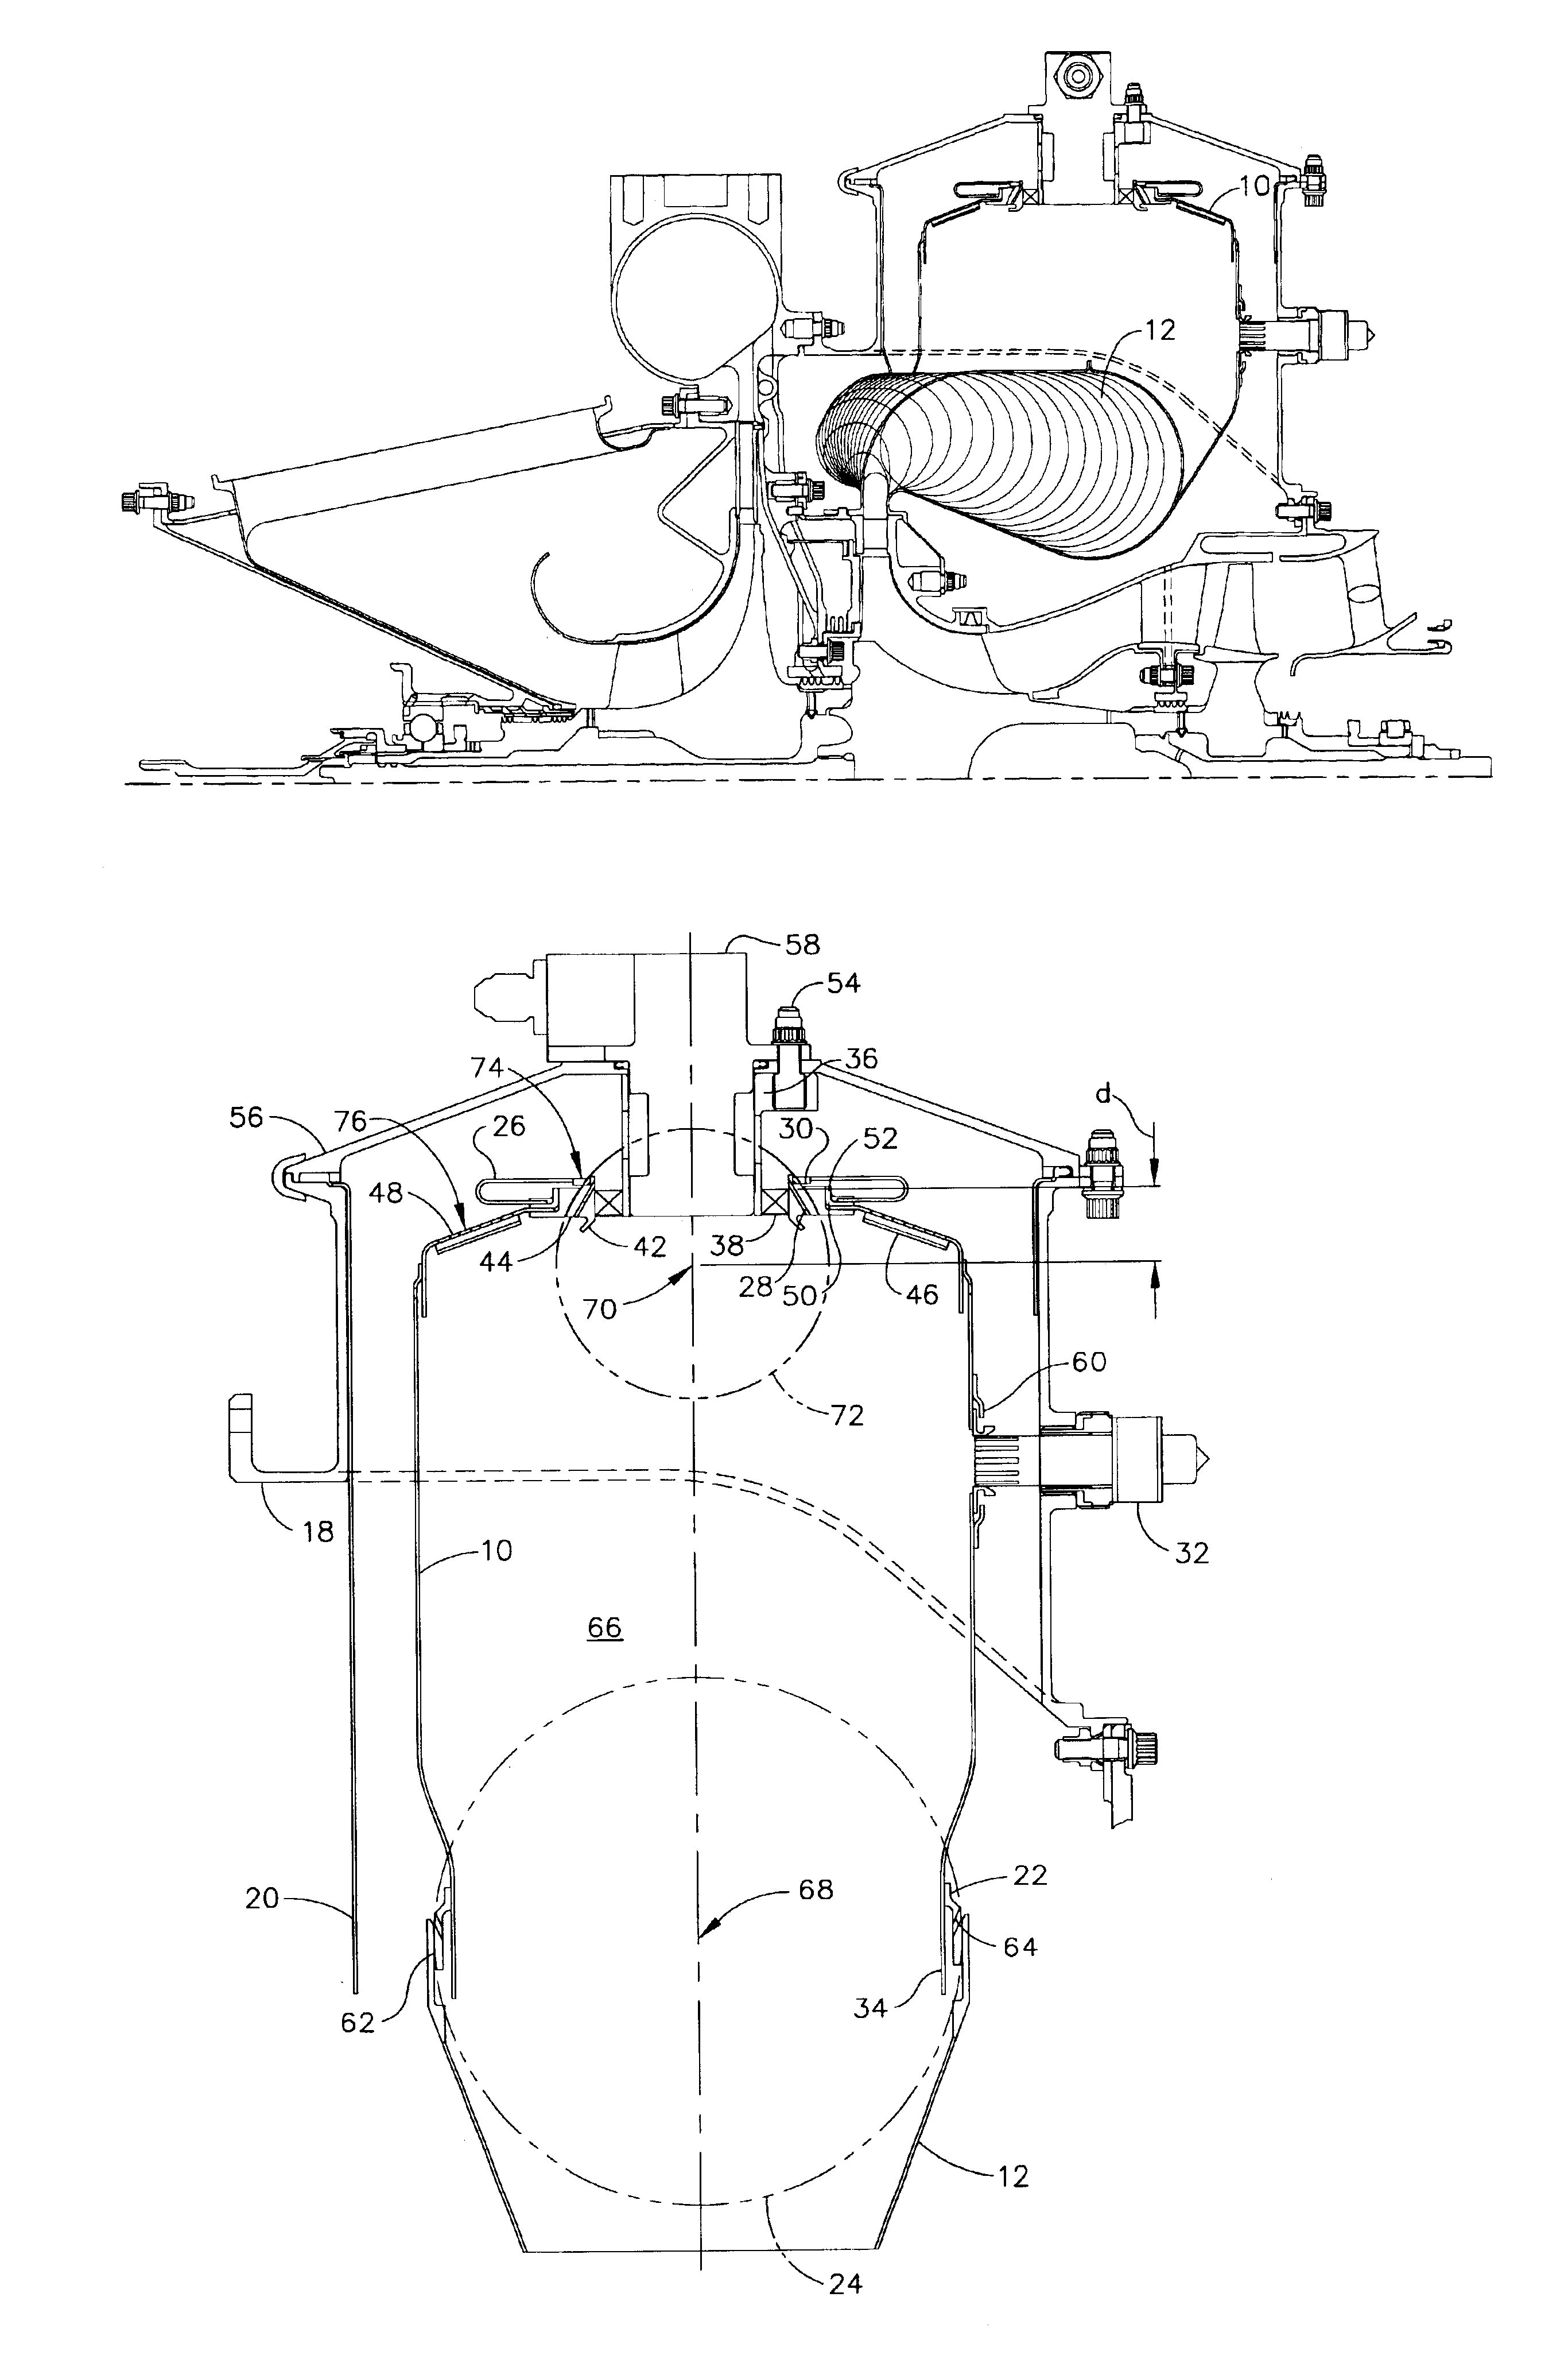 Multi-axial pivoting combustor liner in gas turbine engine